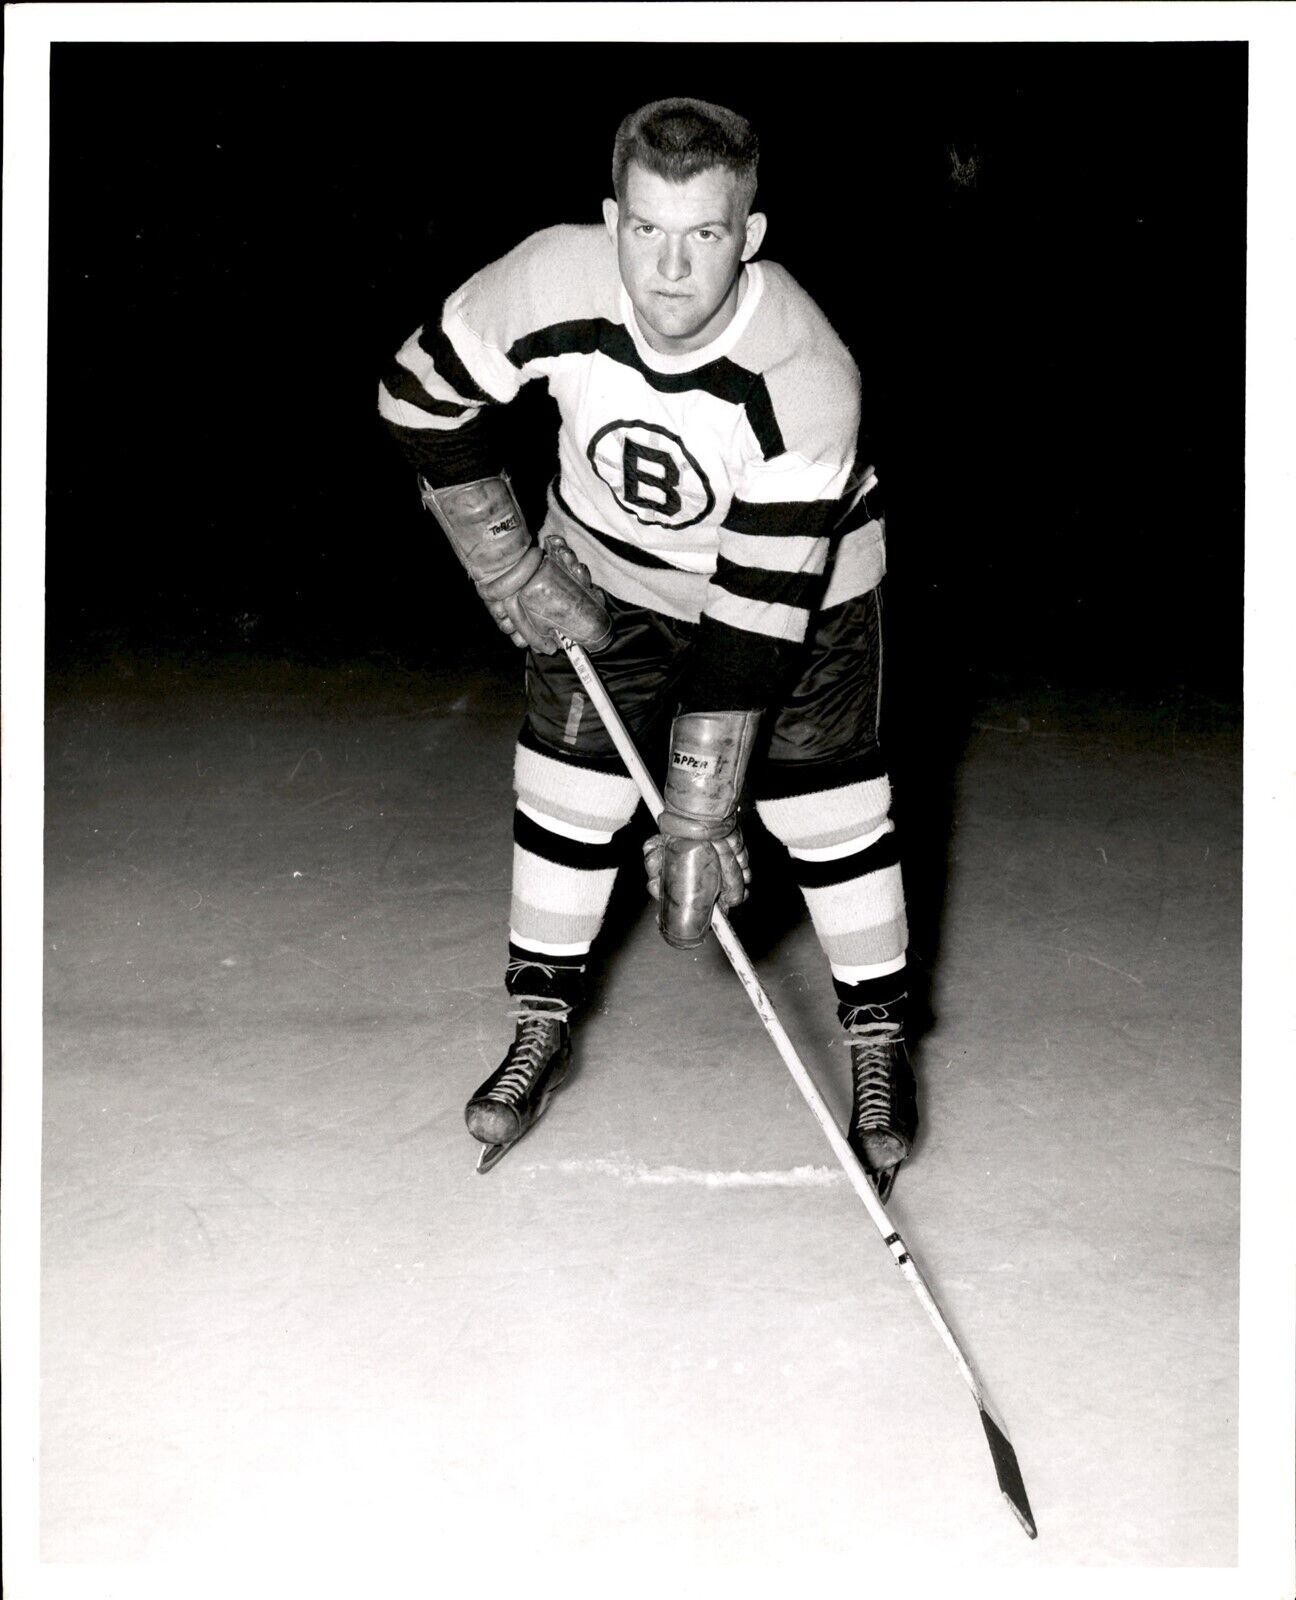 PF5 Original Photo GERRY OUELLETTE 1960-61 BOSTON BRUINS NHL HOCKEY RIGHT WING